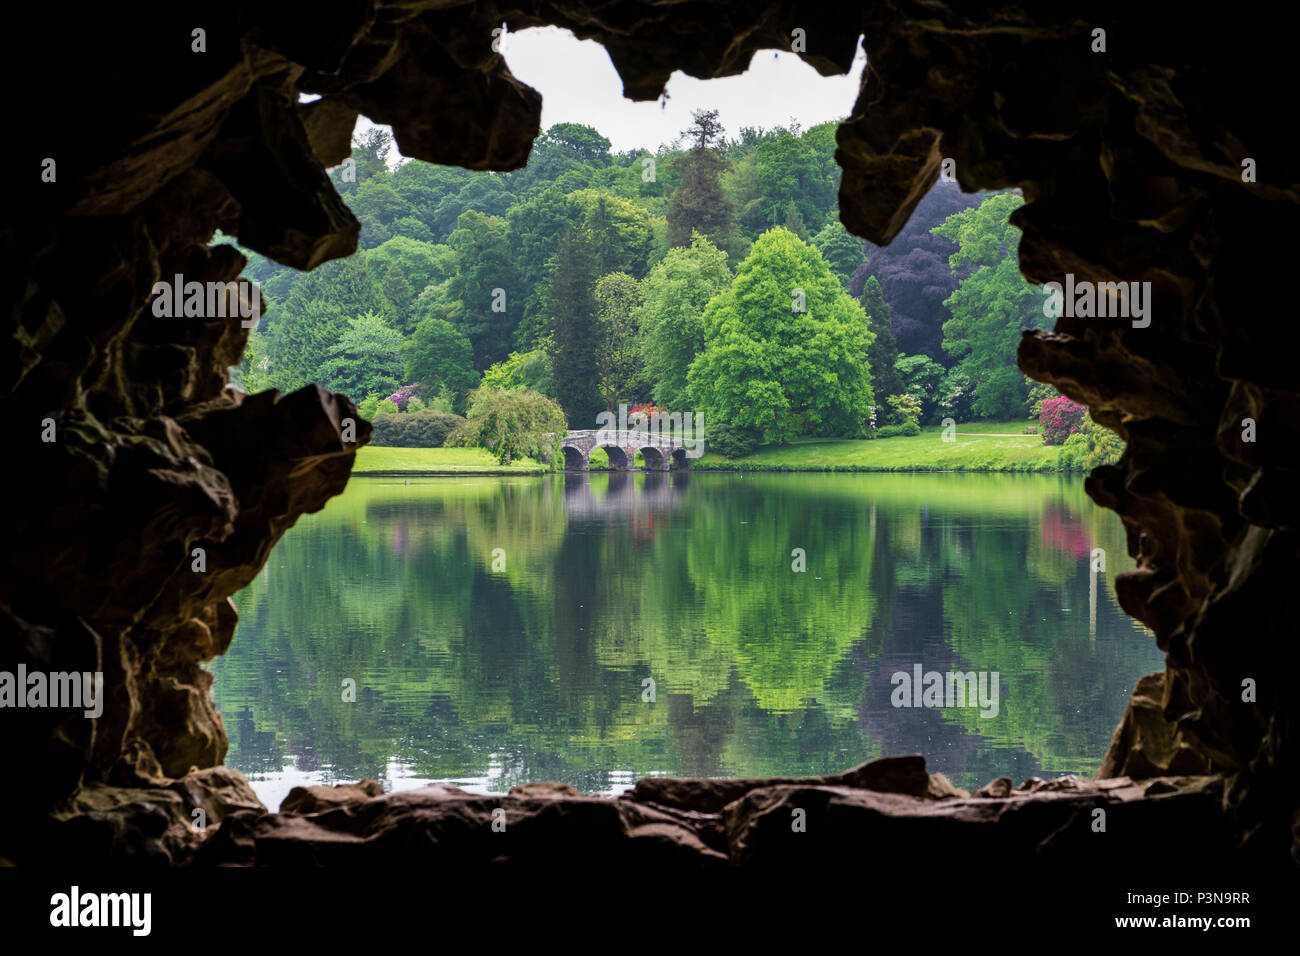 The bridge on the lake at Stourhead, as seen from the Grotto Stock Photo